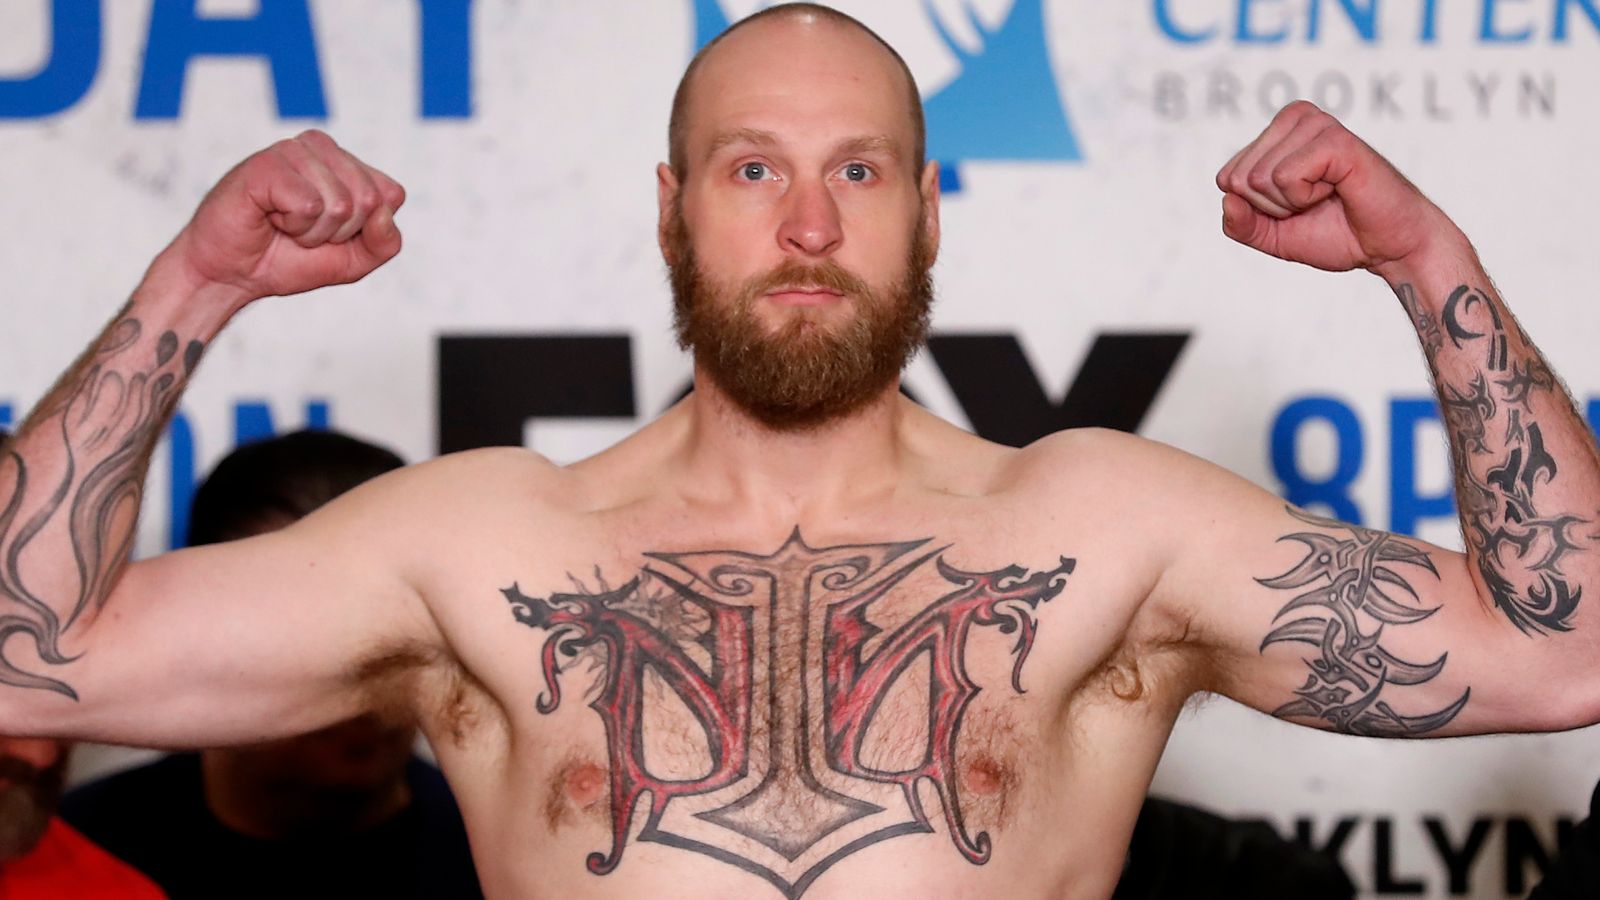 Tyson Fury easier than Oleksandr Usyk, says Robert Helenius who is close to world title fight I would knock Fury out Boxing News Sky Sports